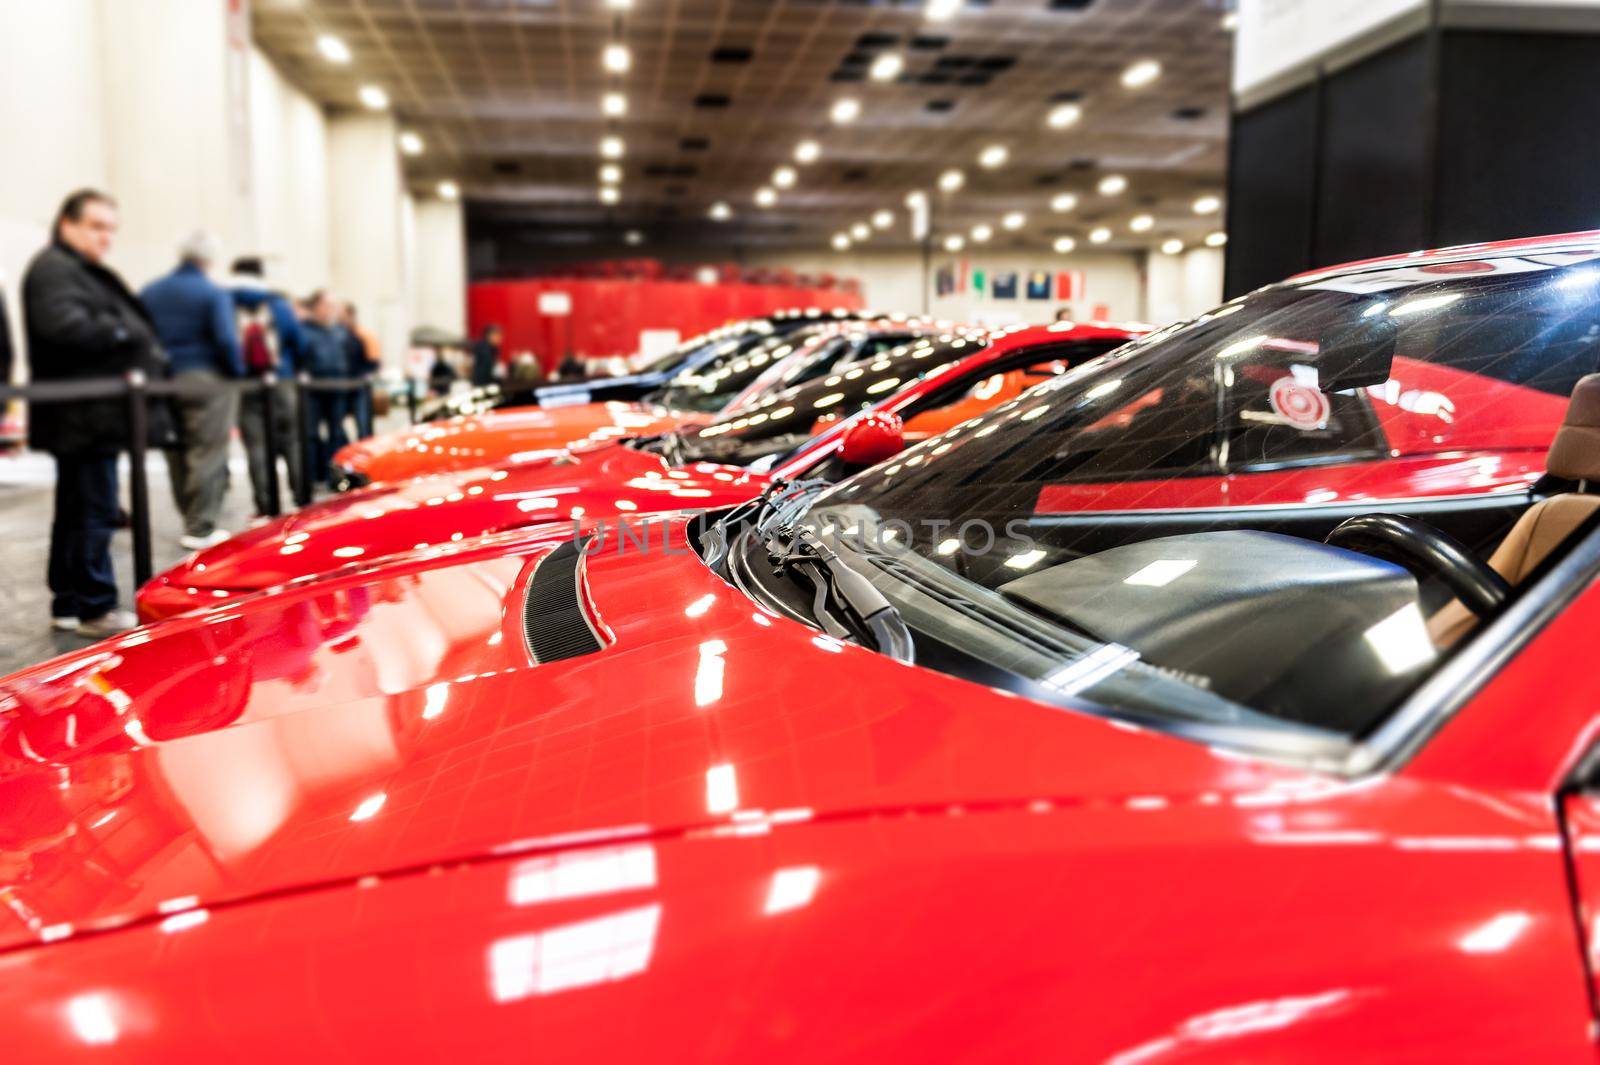 View of many red cars in a showroom